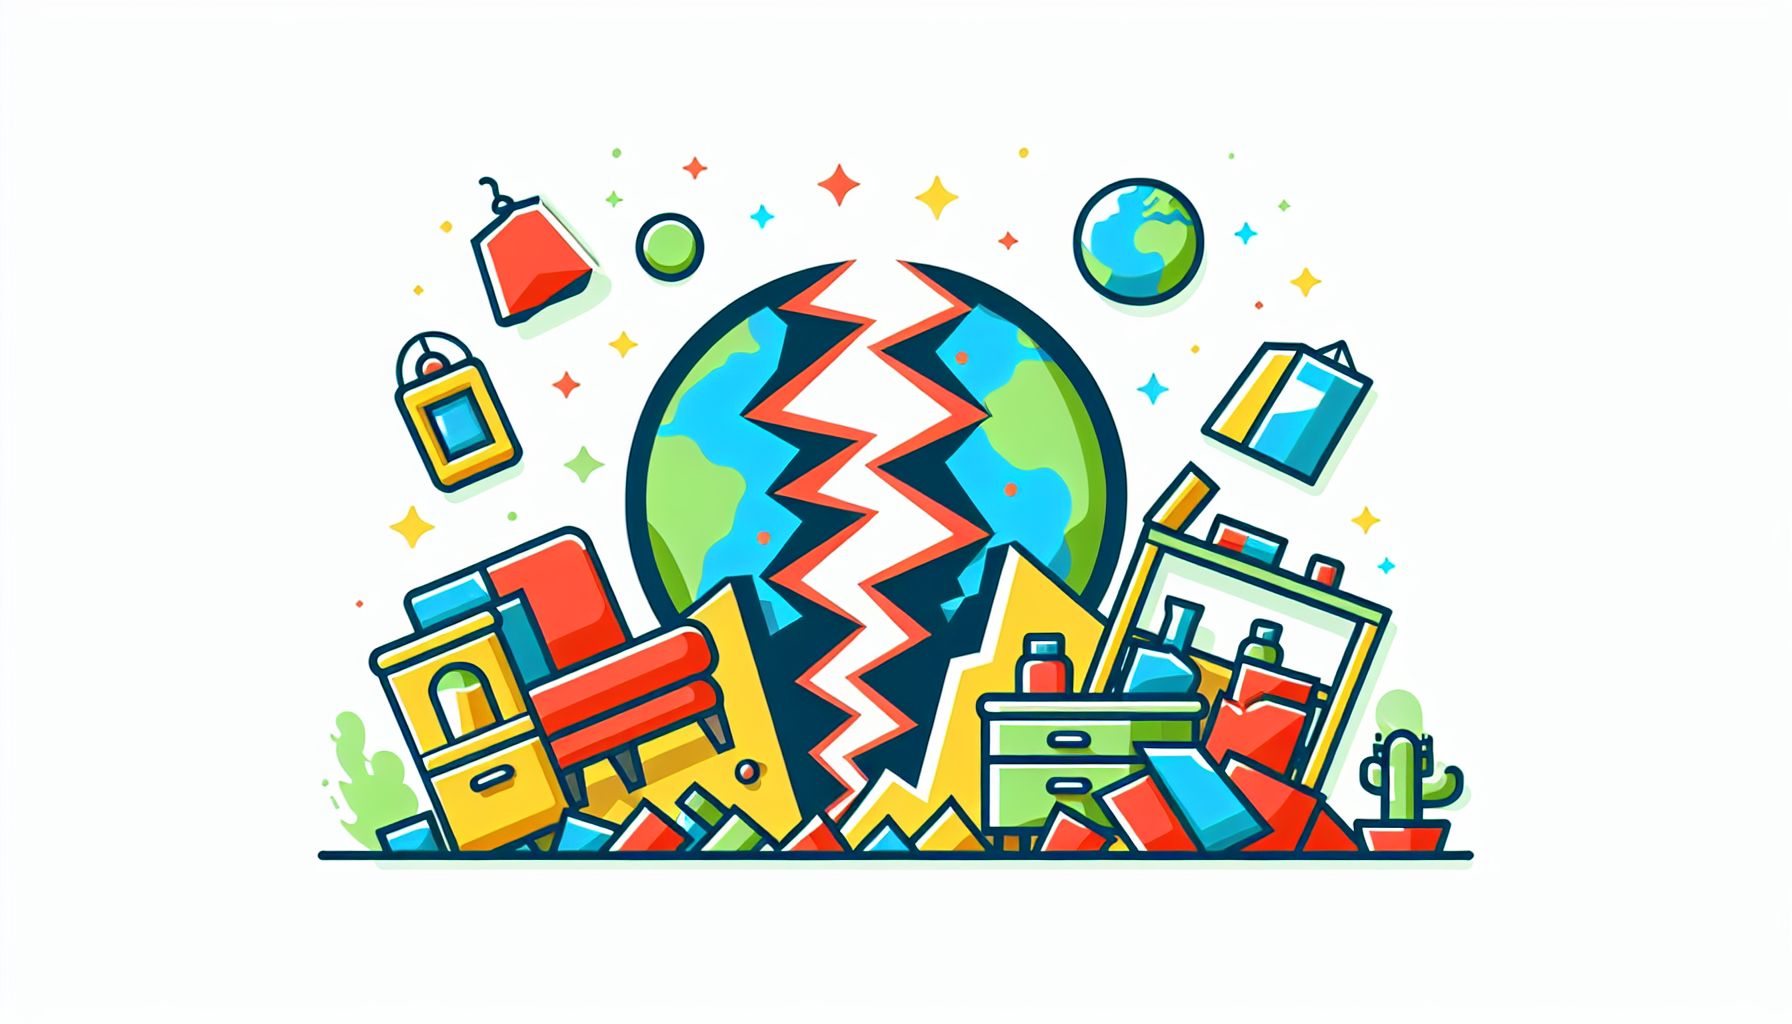 Earthquake in flat illustration style and white background, red #f47574, green #88c7a8, yellow #fcc44b, and blue #645bc8 colors.